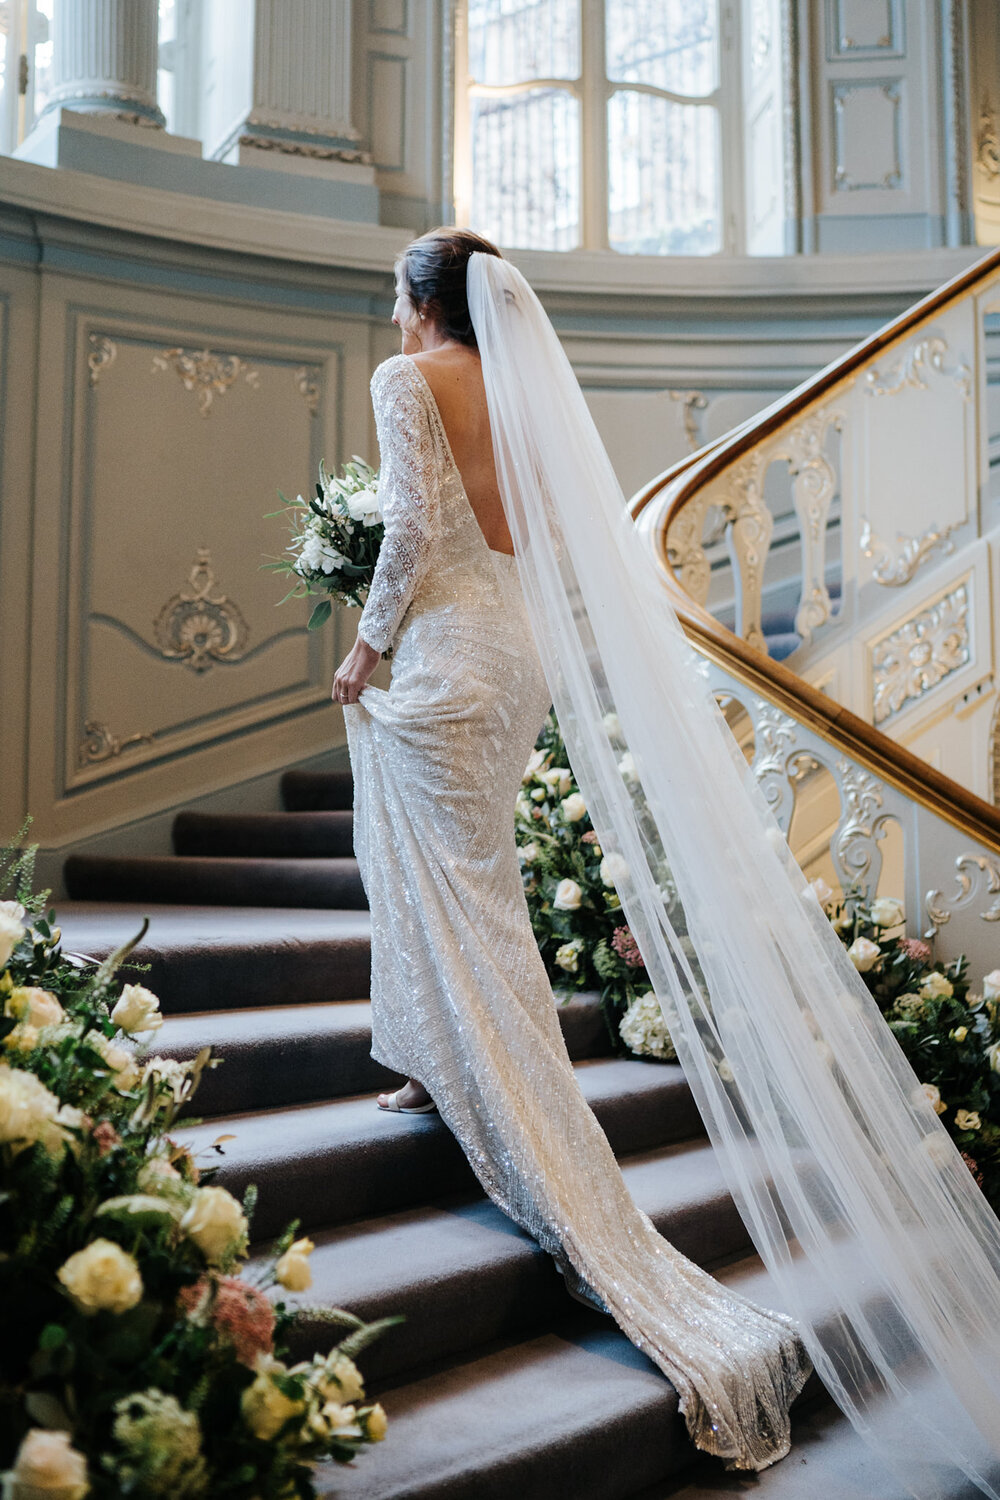 Bride walks up the decorated stairs at Savile Club London as her dress trails behind her